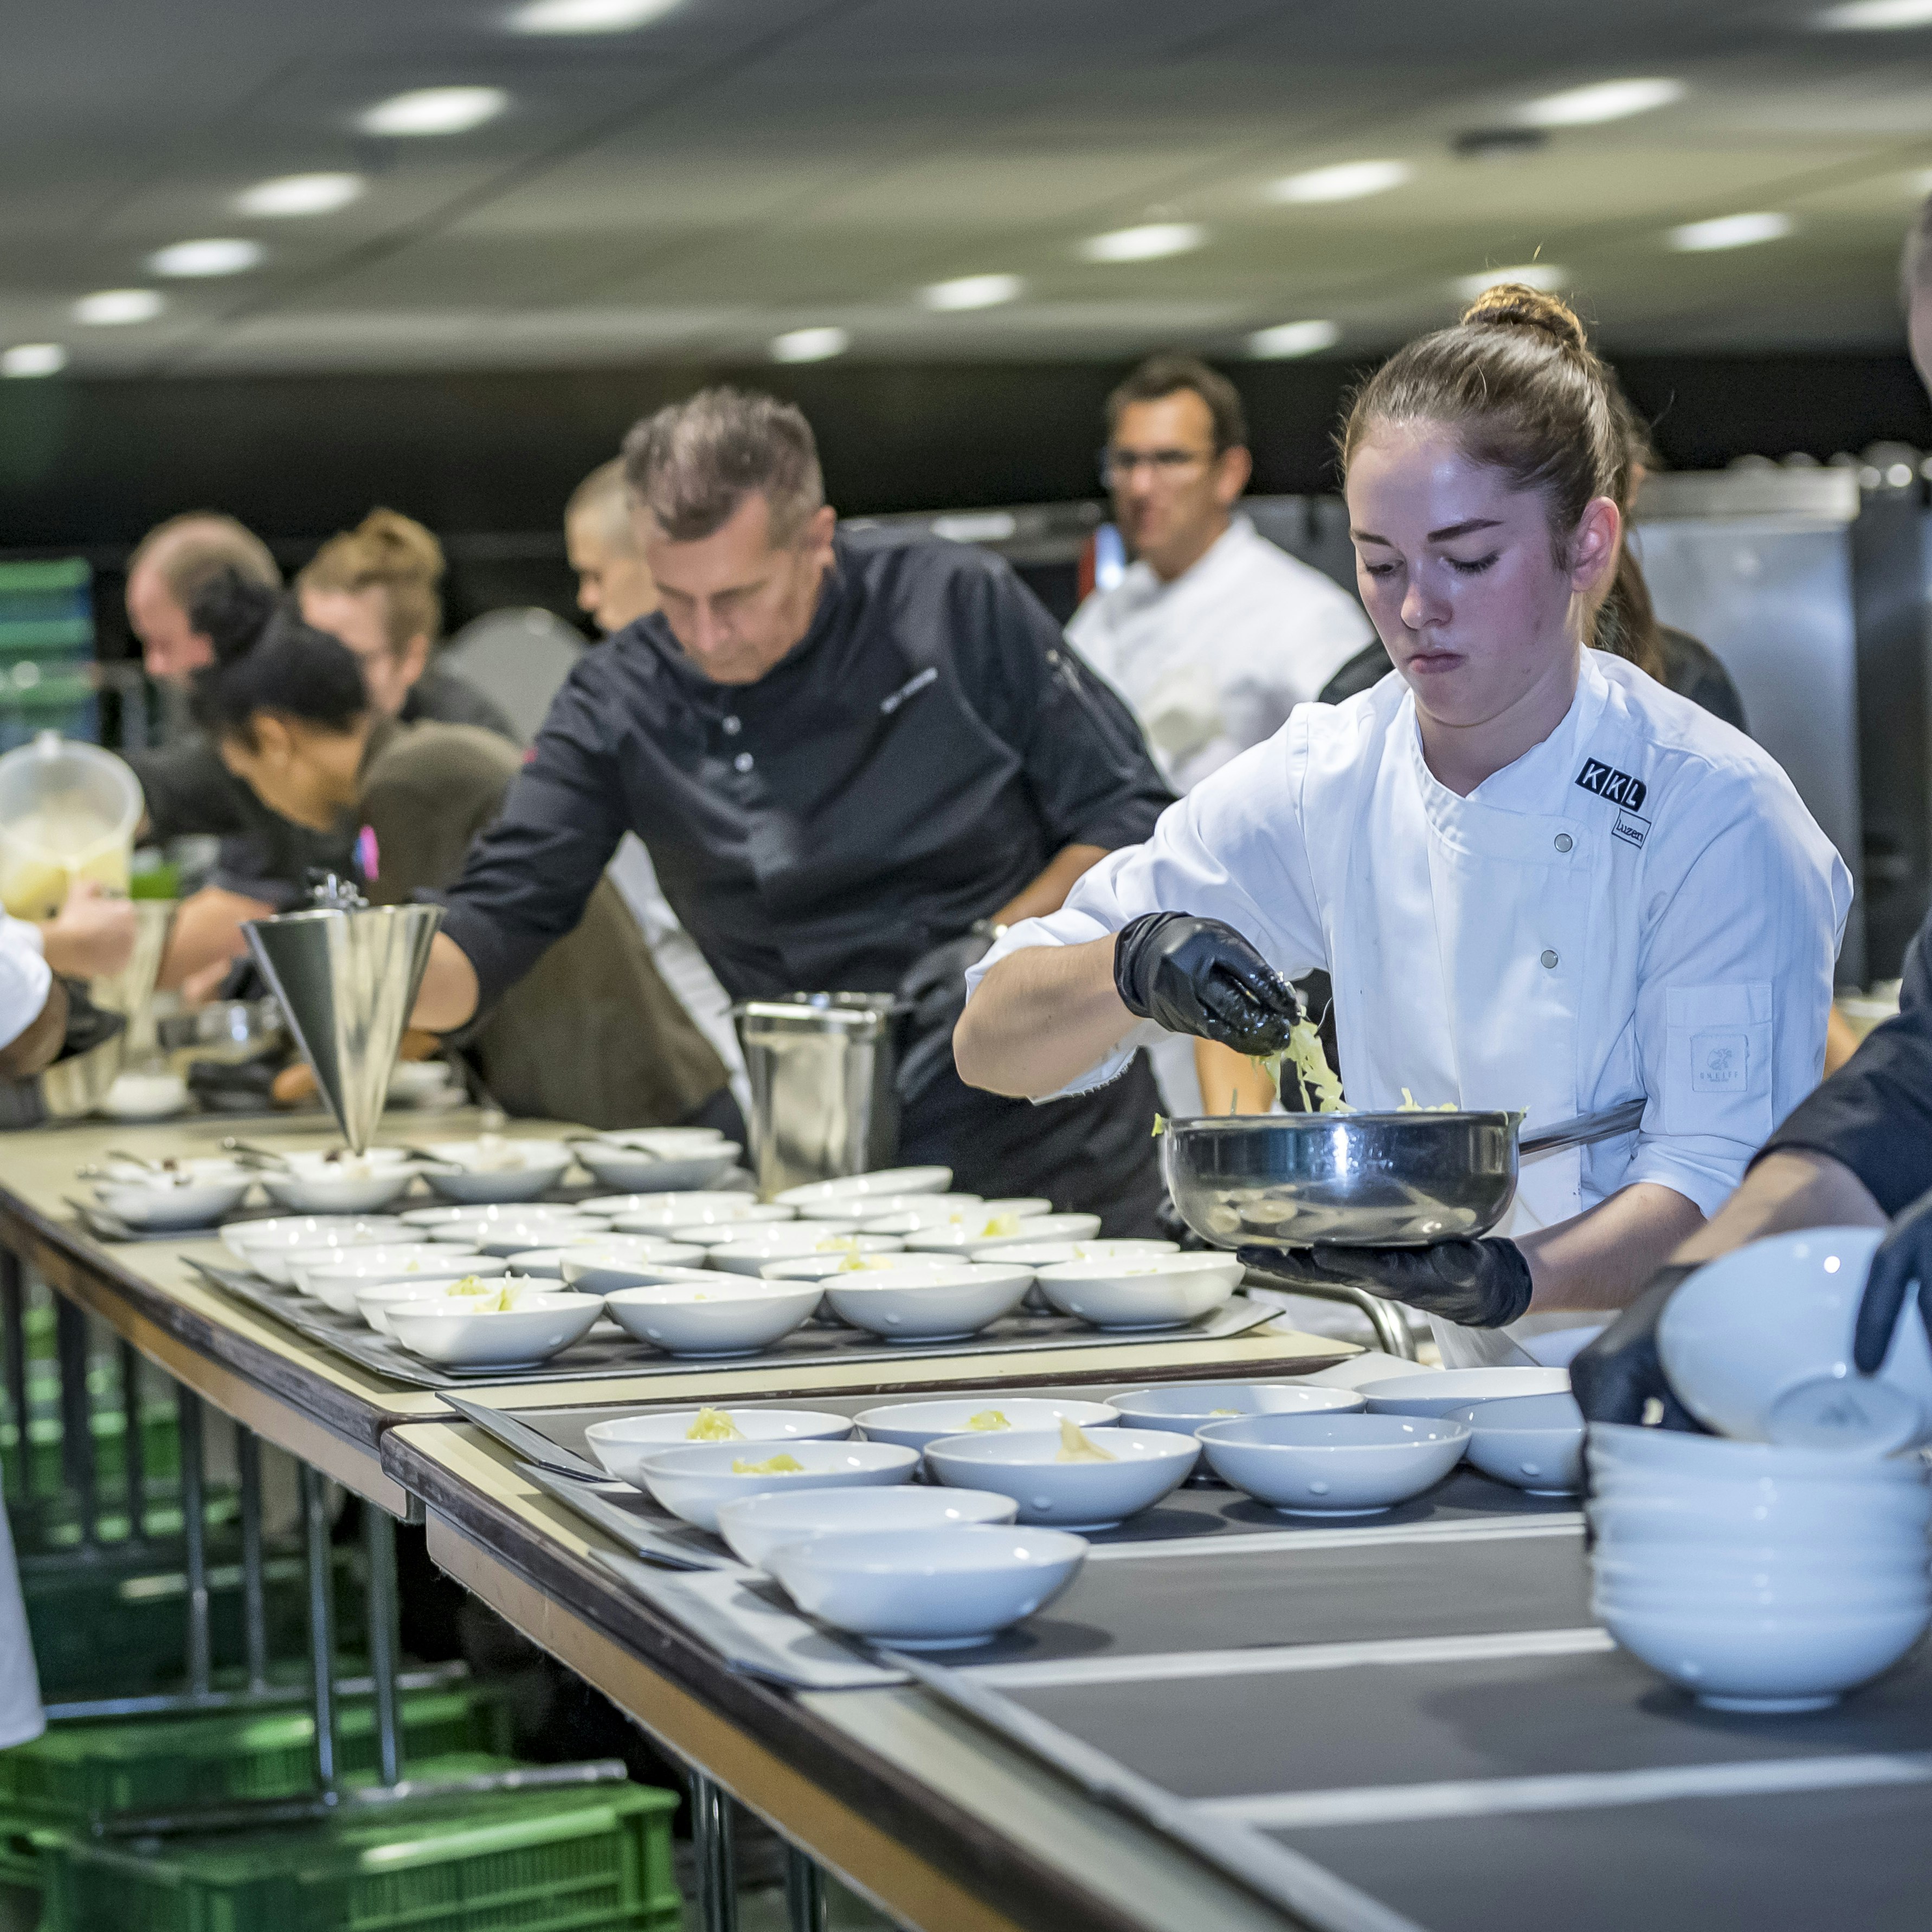 Event Catering at Anniversary celebration: 125 years of CKW at KKL Luzern